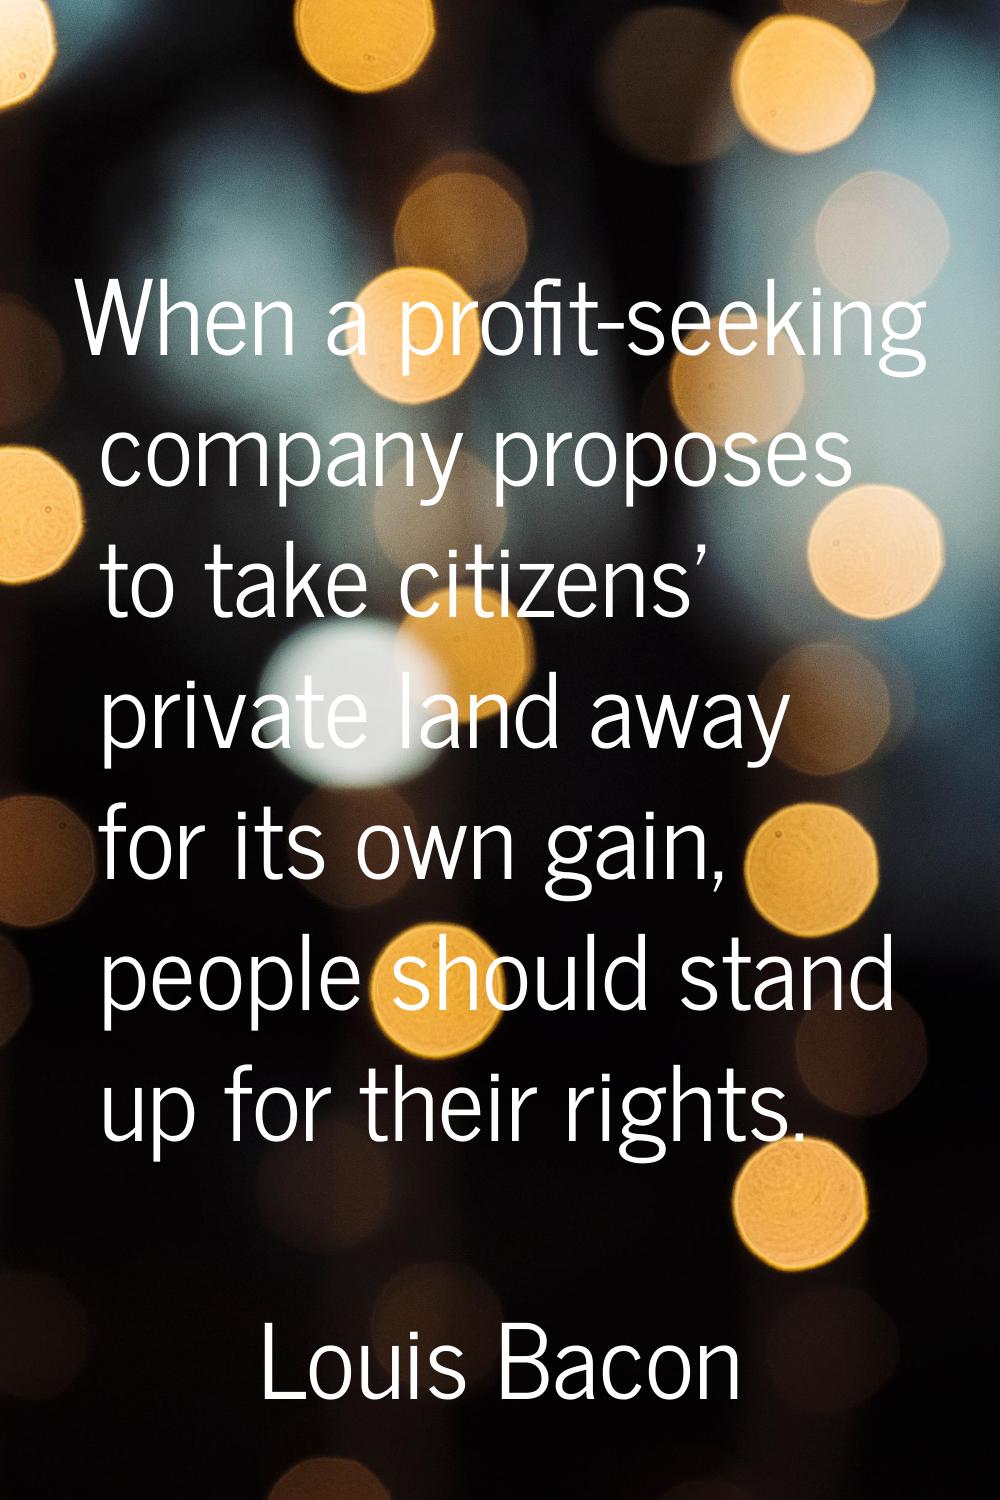 When a profit-seeking company proposes to take citizens' private land away for its own gain, people